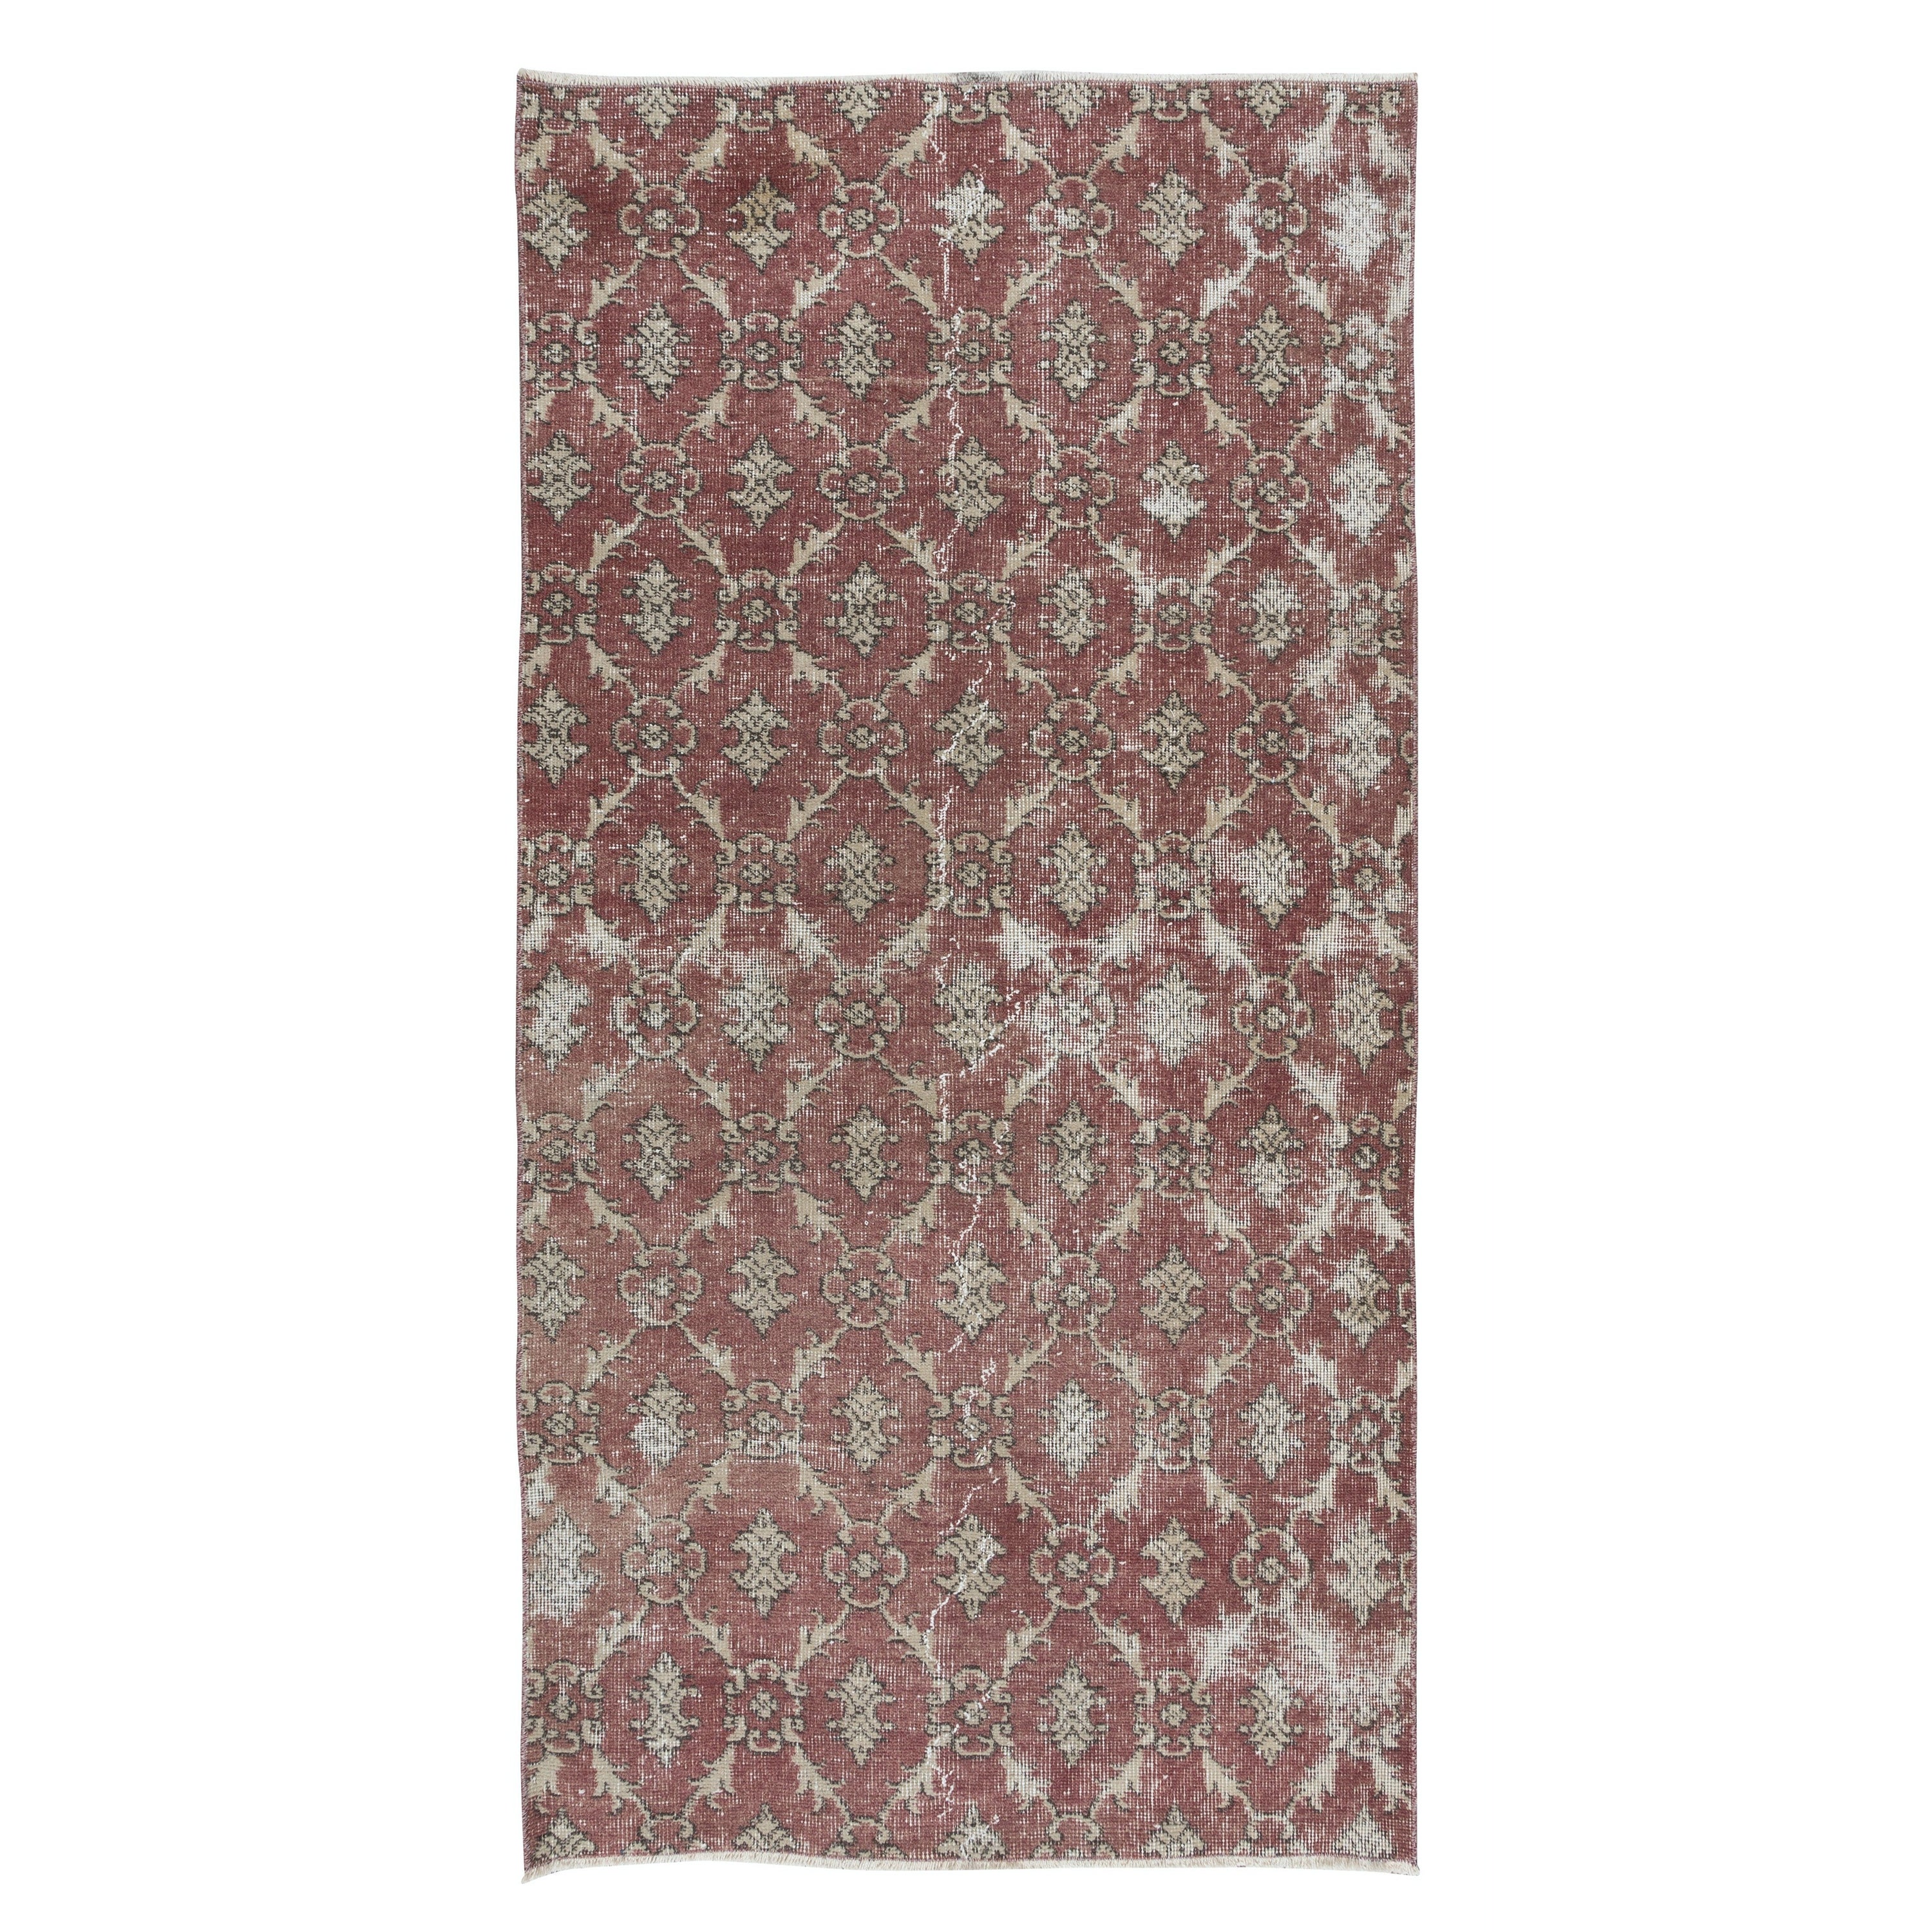 3.3x6.6 Ft Small Handmade Turkish Rug in Barn Red & Beige, Rustic Kitchen Rug For Sale